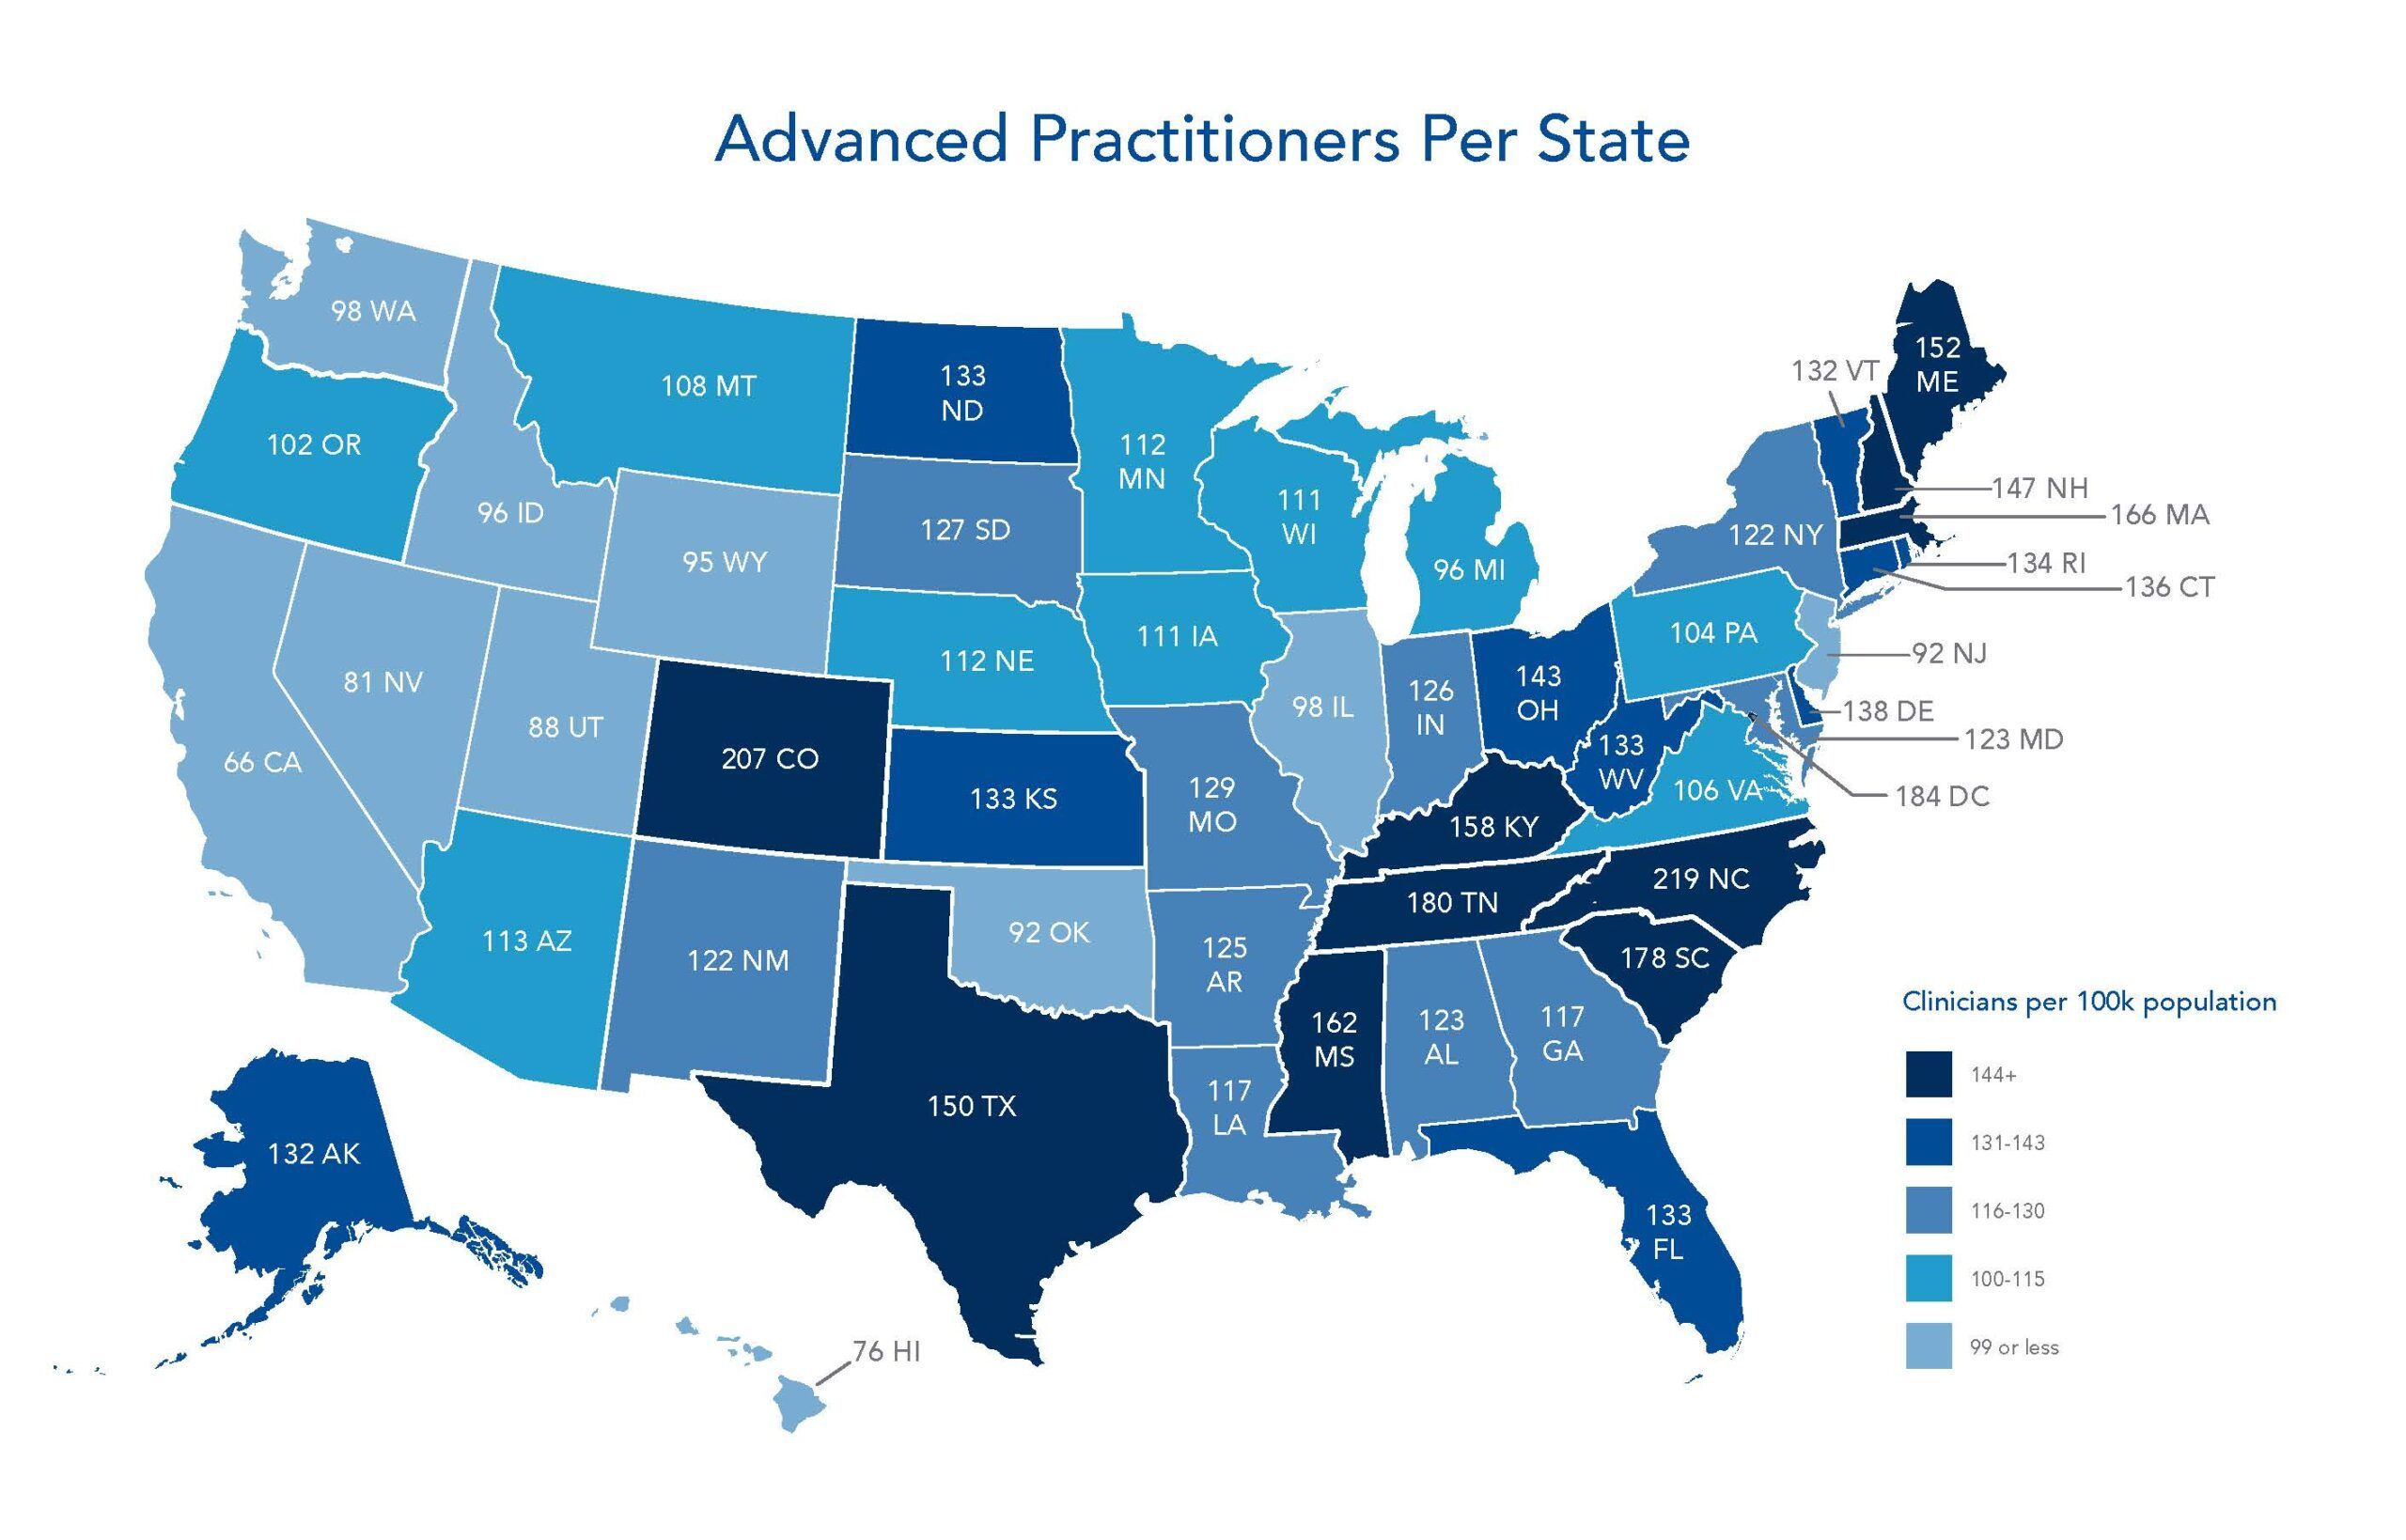 Advanced Practitioners per state